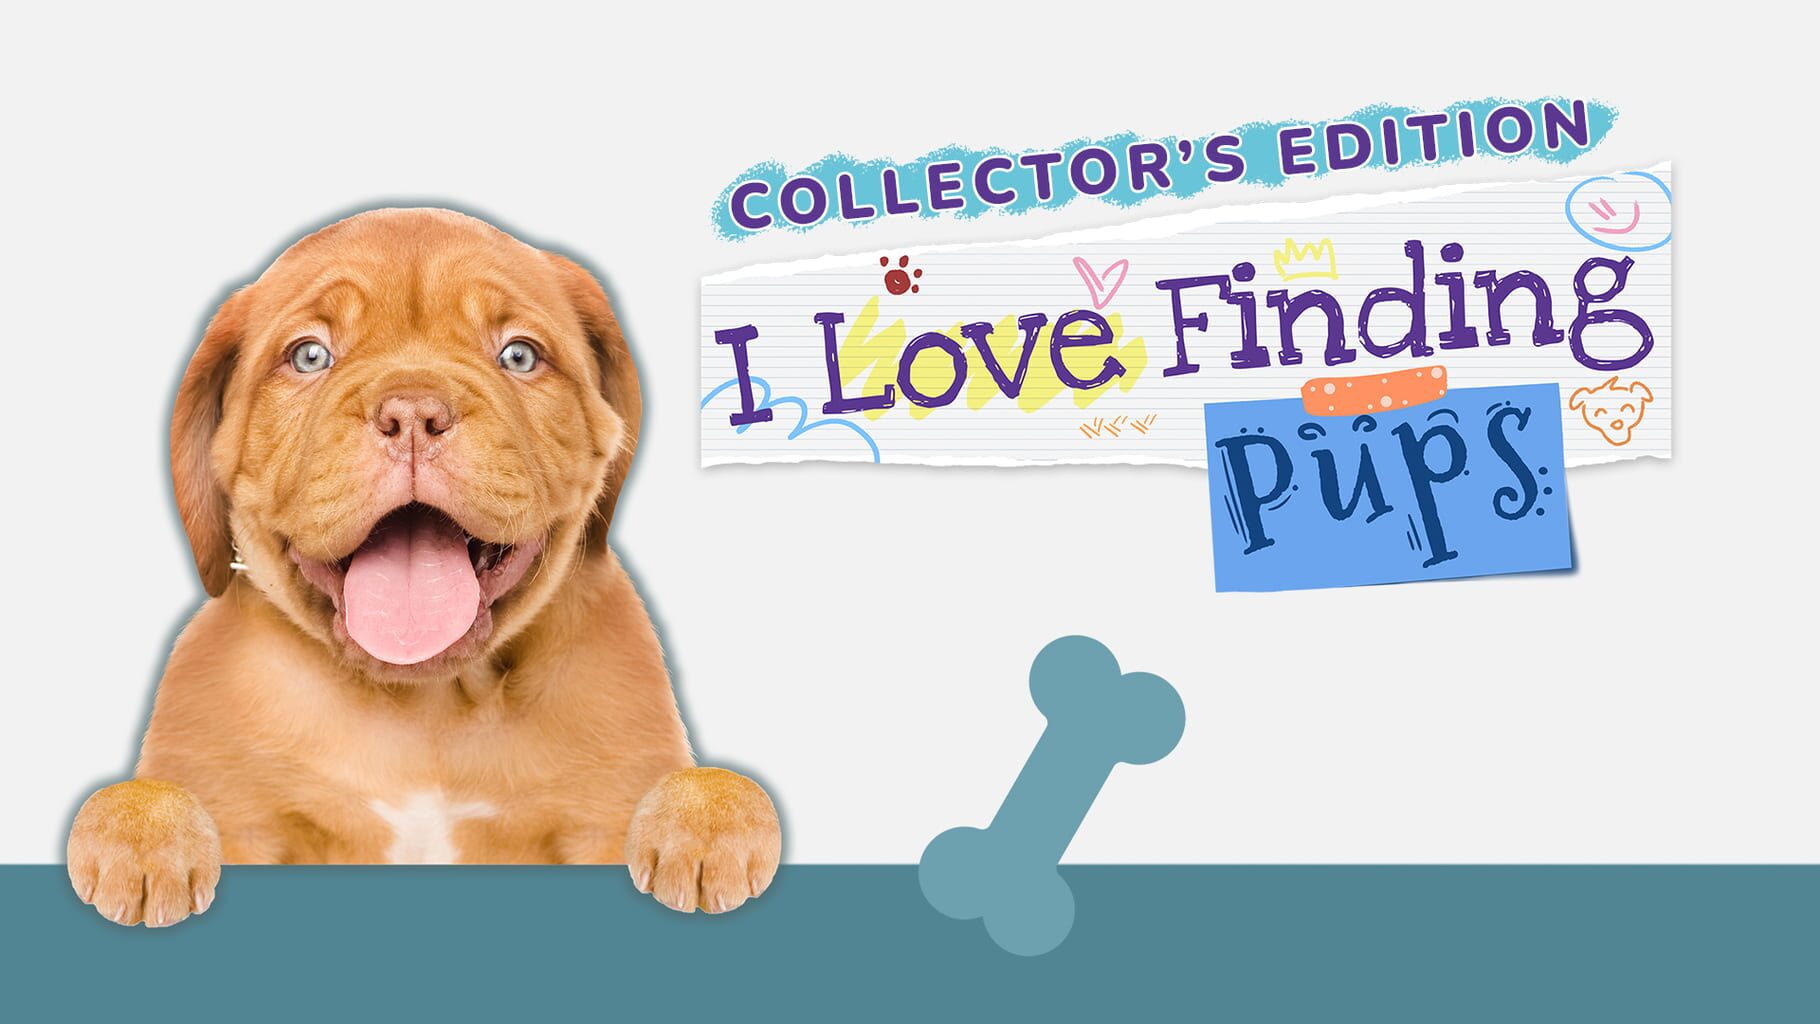 I Love Finding Pups!: Collector's Edition artwork